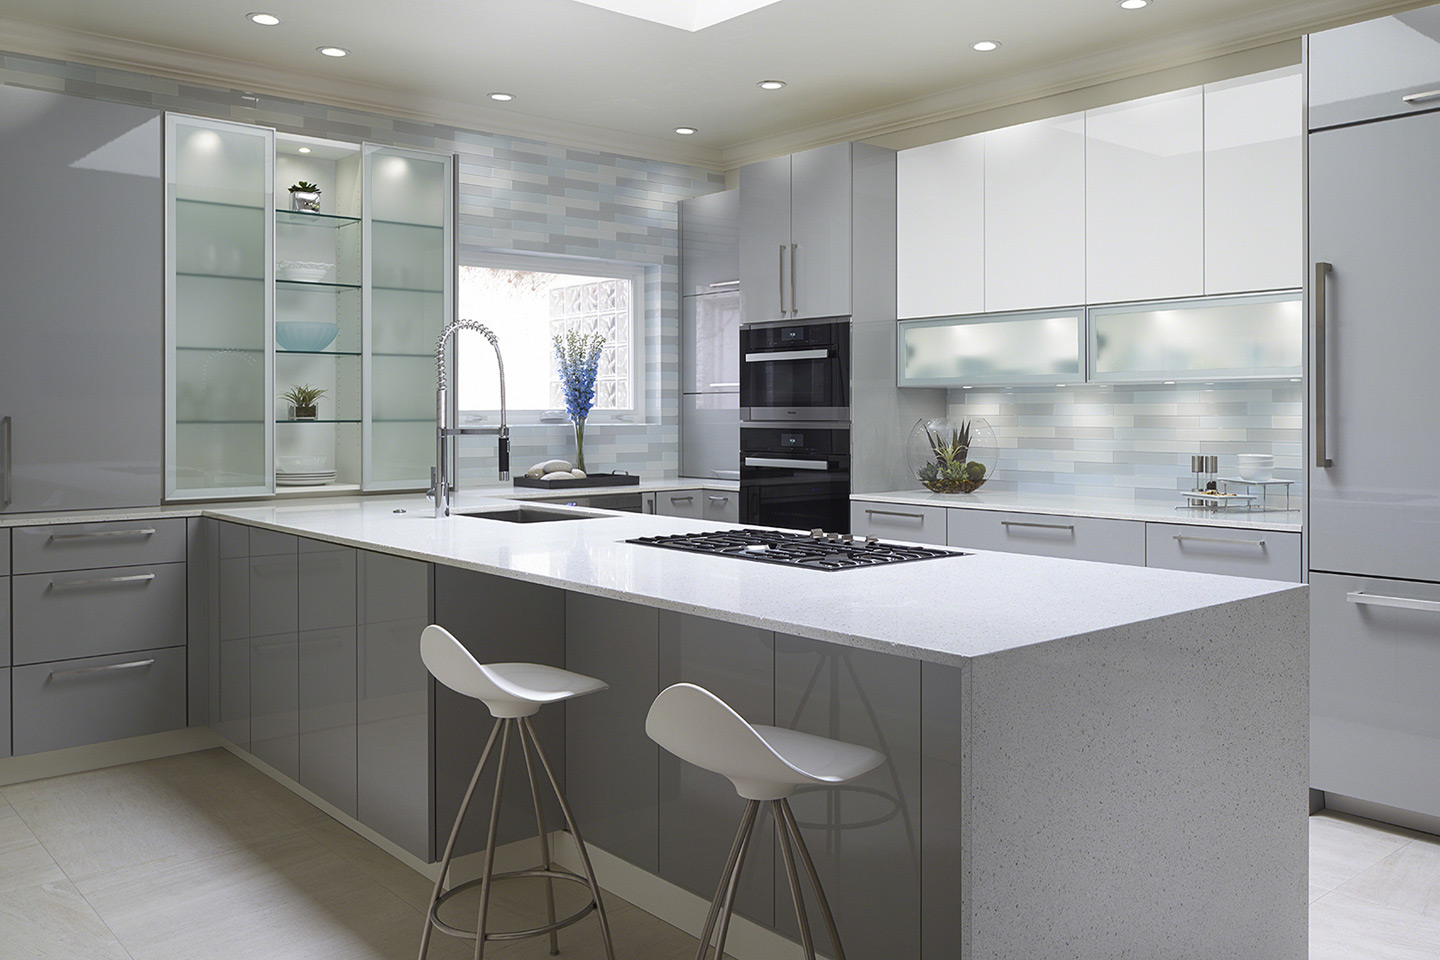 High gloss contemporary cabinets for this Norman remodel with aluminum frosted glass doors and integrated led lighting.